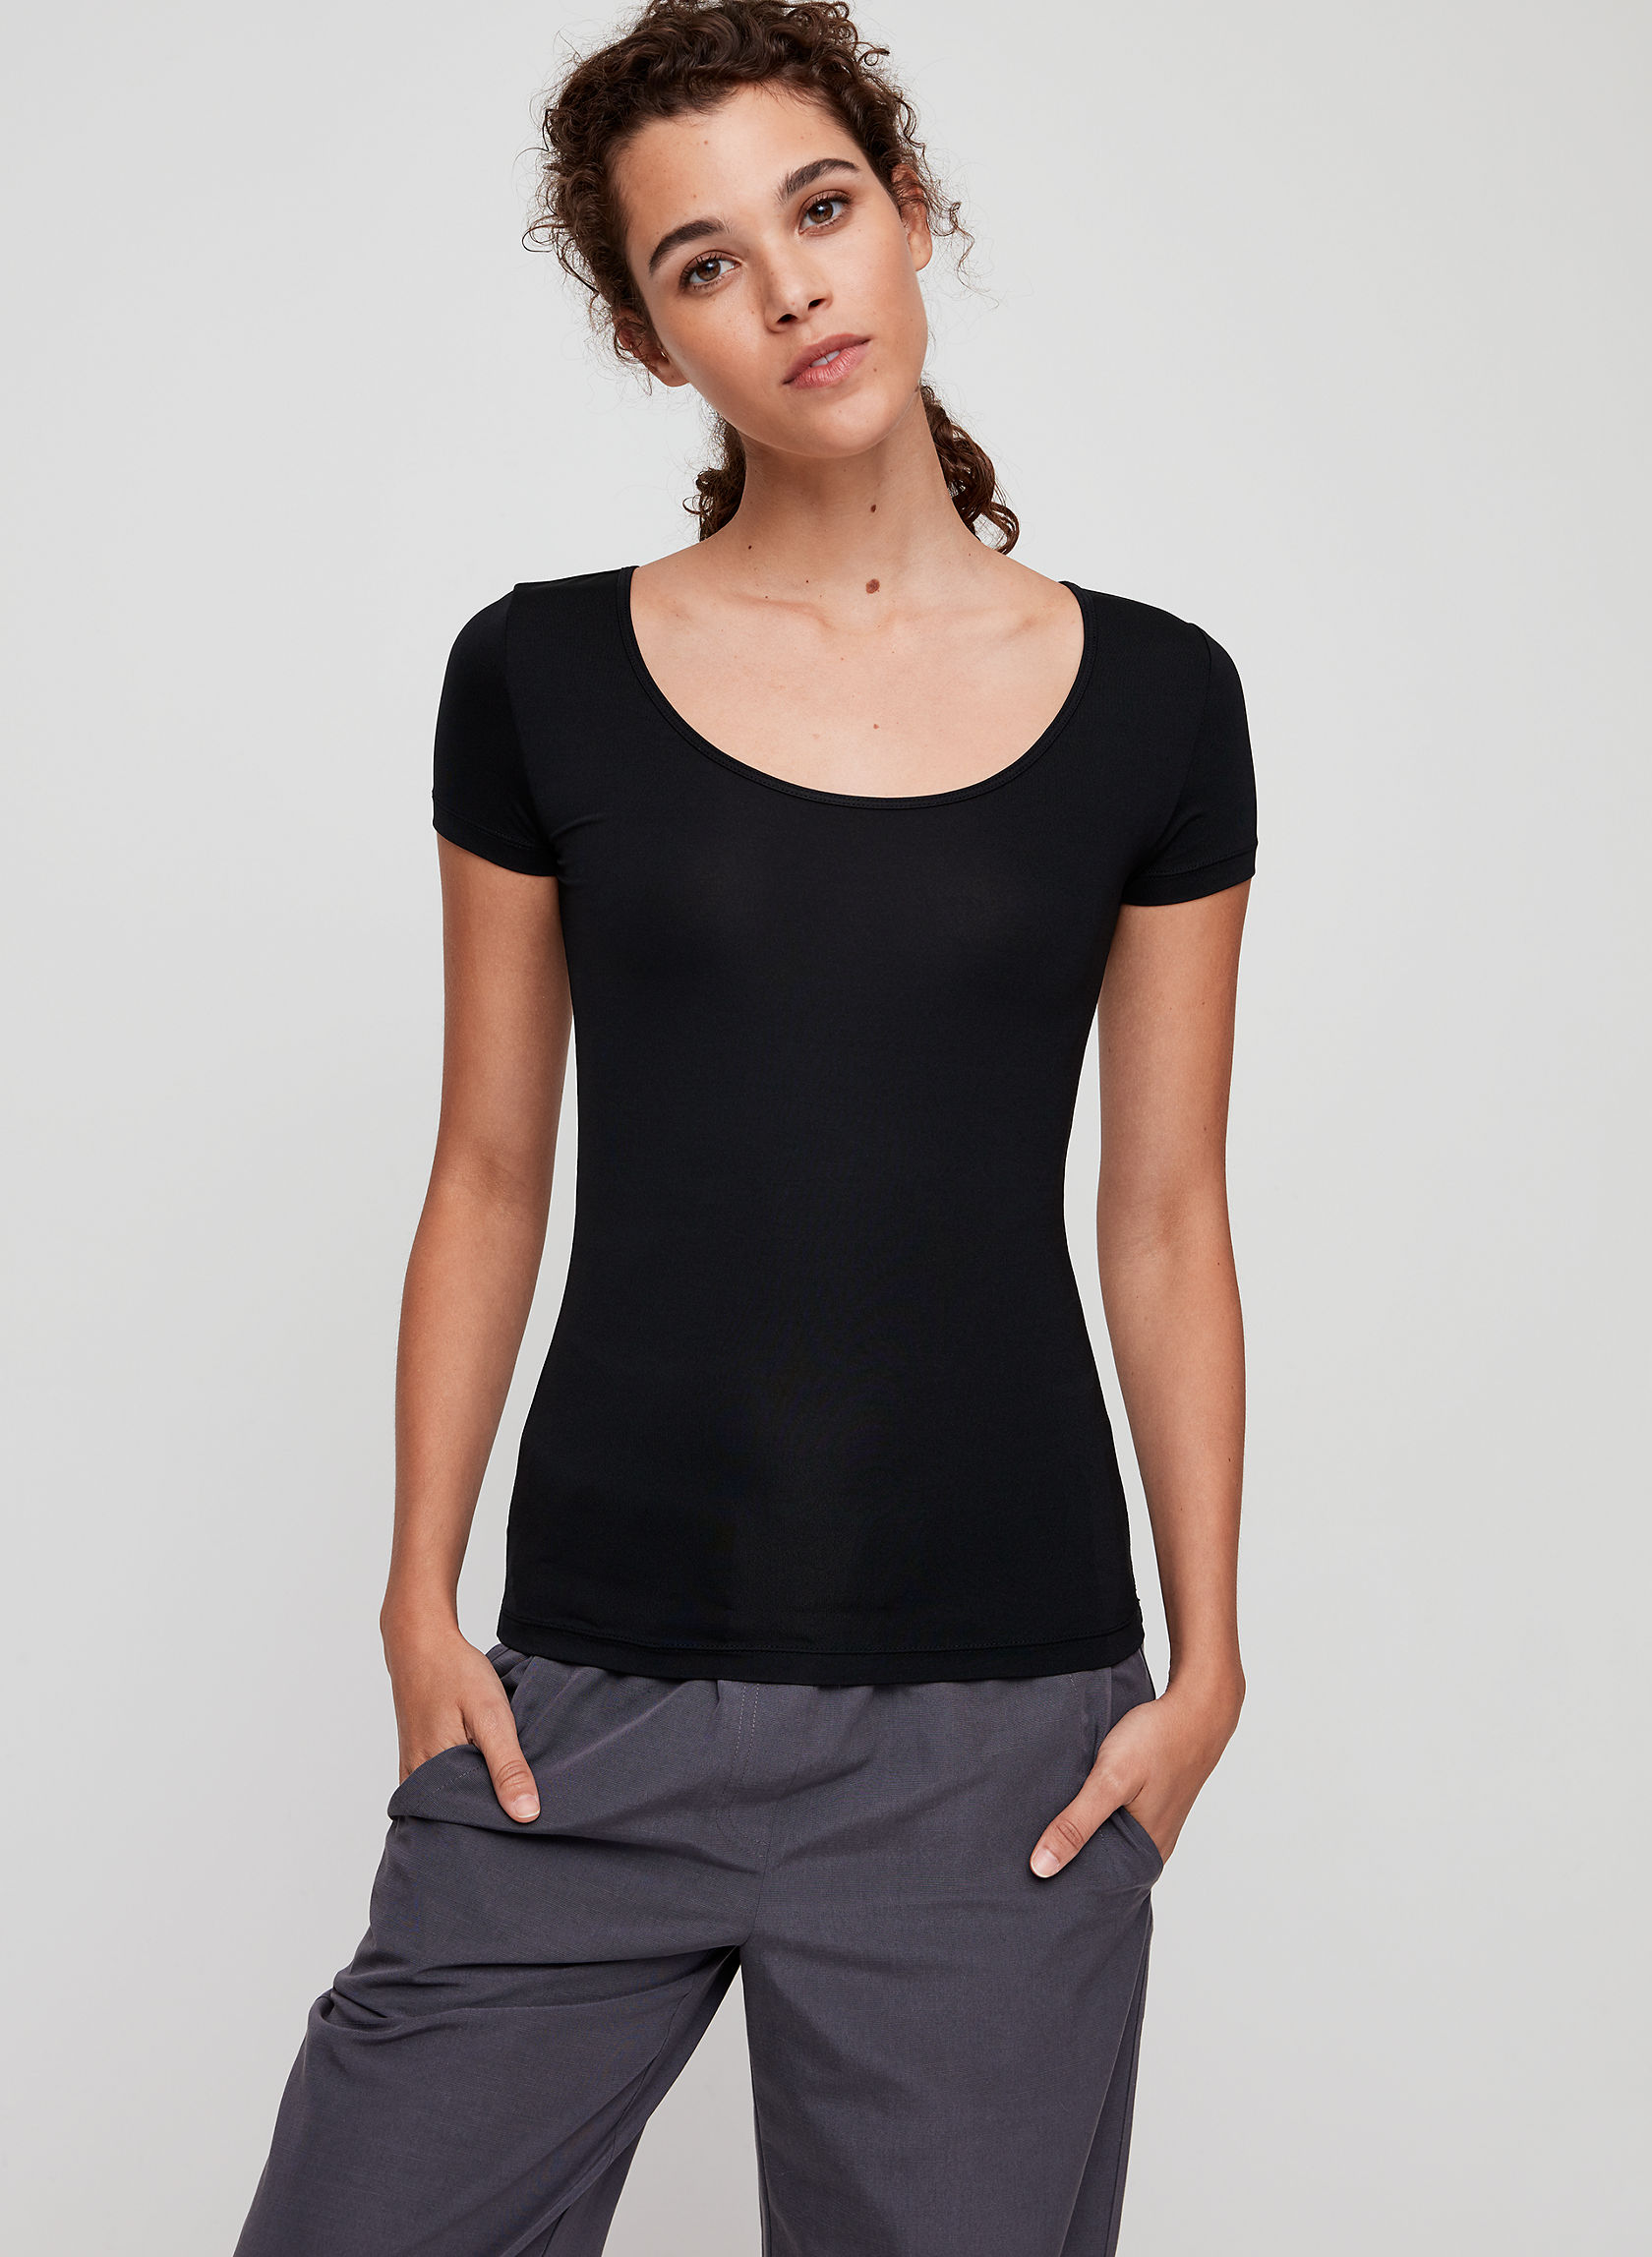 The Group by Babaton COOLUXE T-SHIRT | Aritzia US